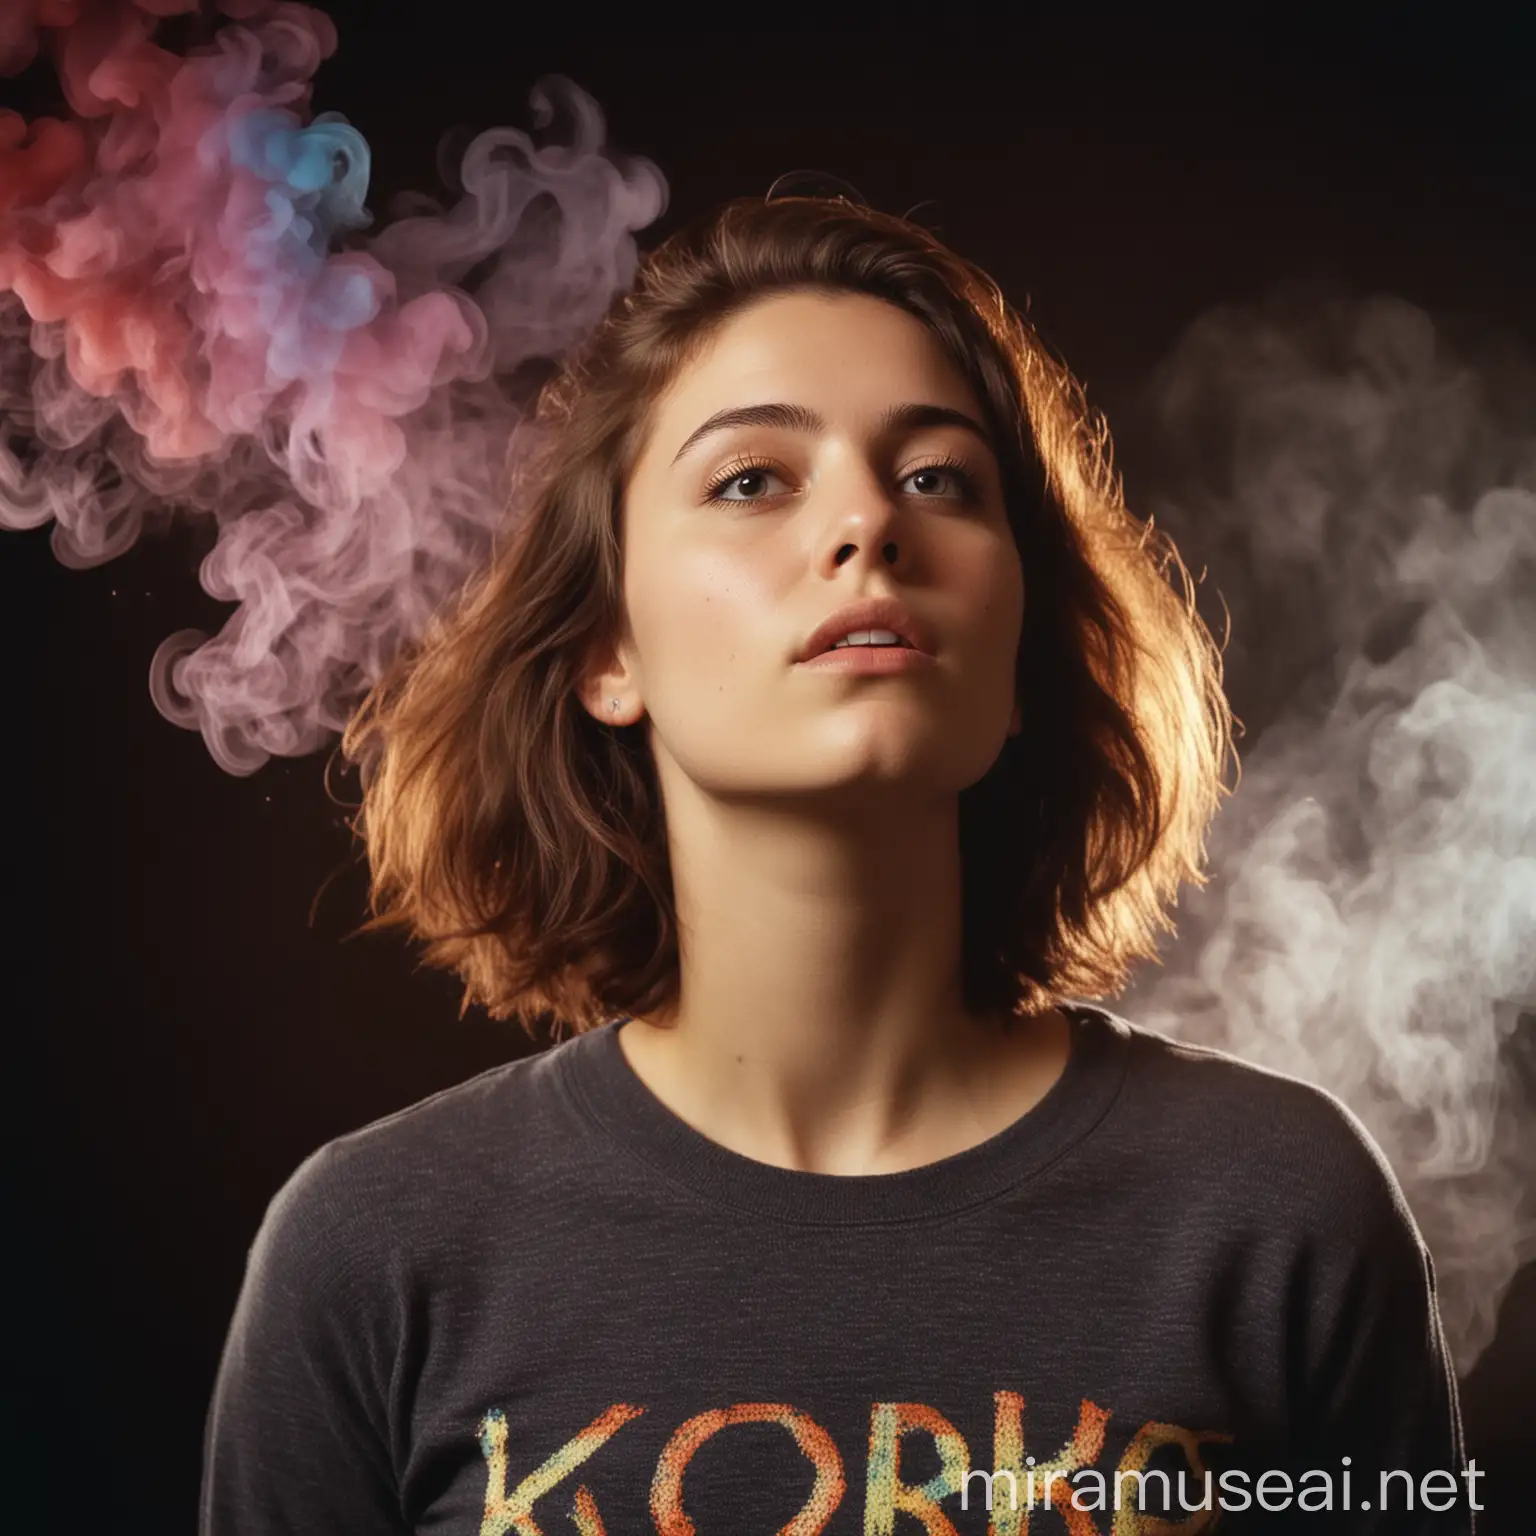 Contemplative Young Woman in Casual Attire Surrounded by Colorful Smoke on Noir Background